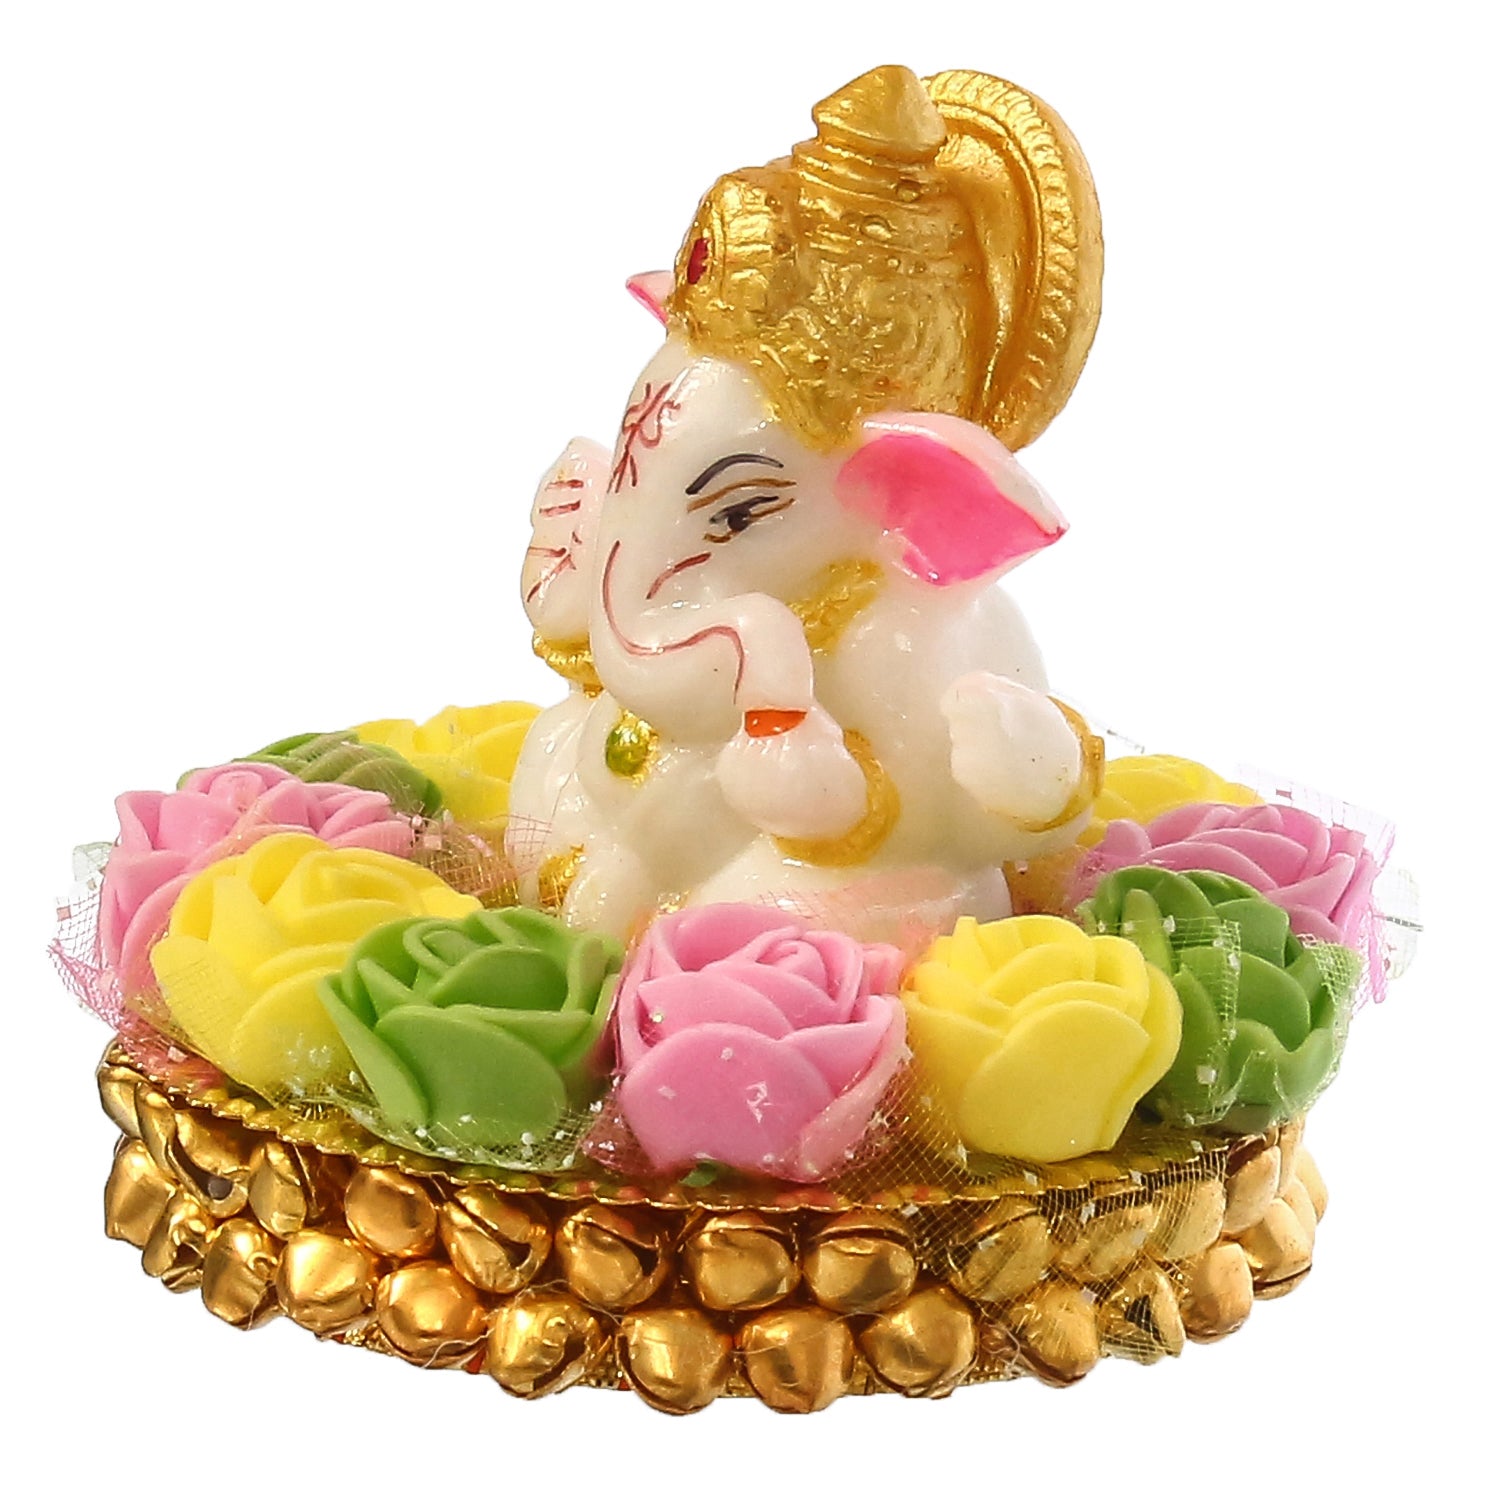 Polyresin Lord Ganesha Idol on Decorative Handcrafted Plate with Colorful Flowers 5